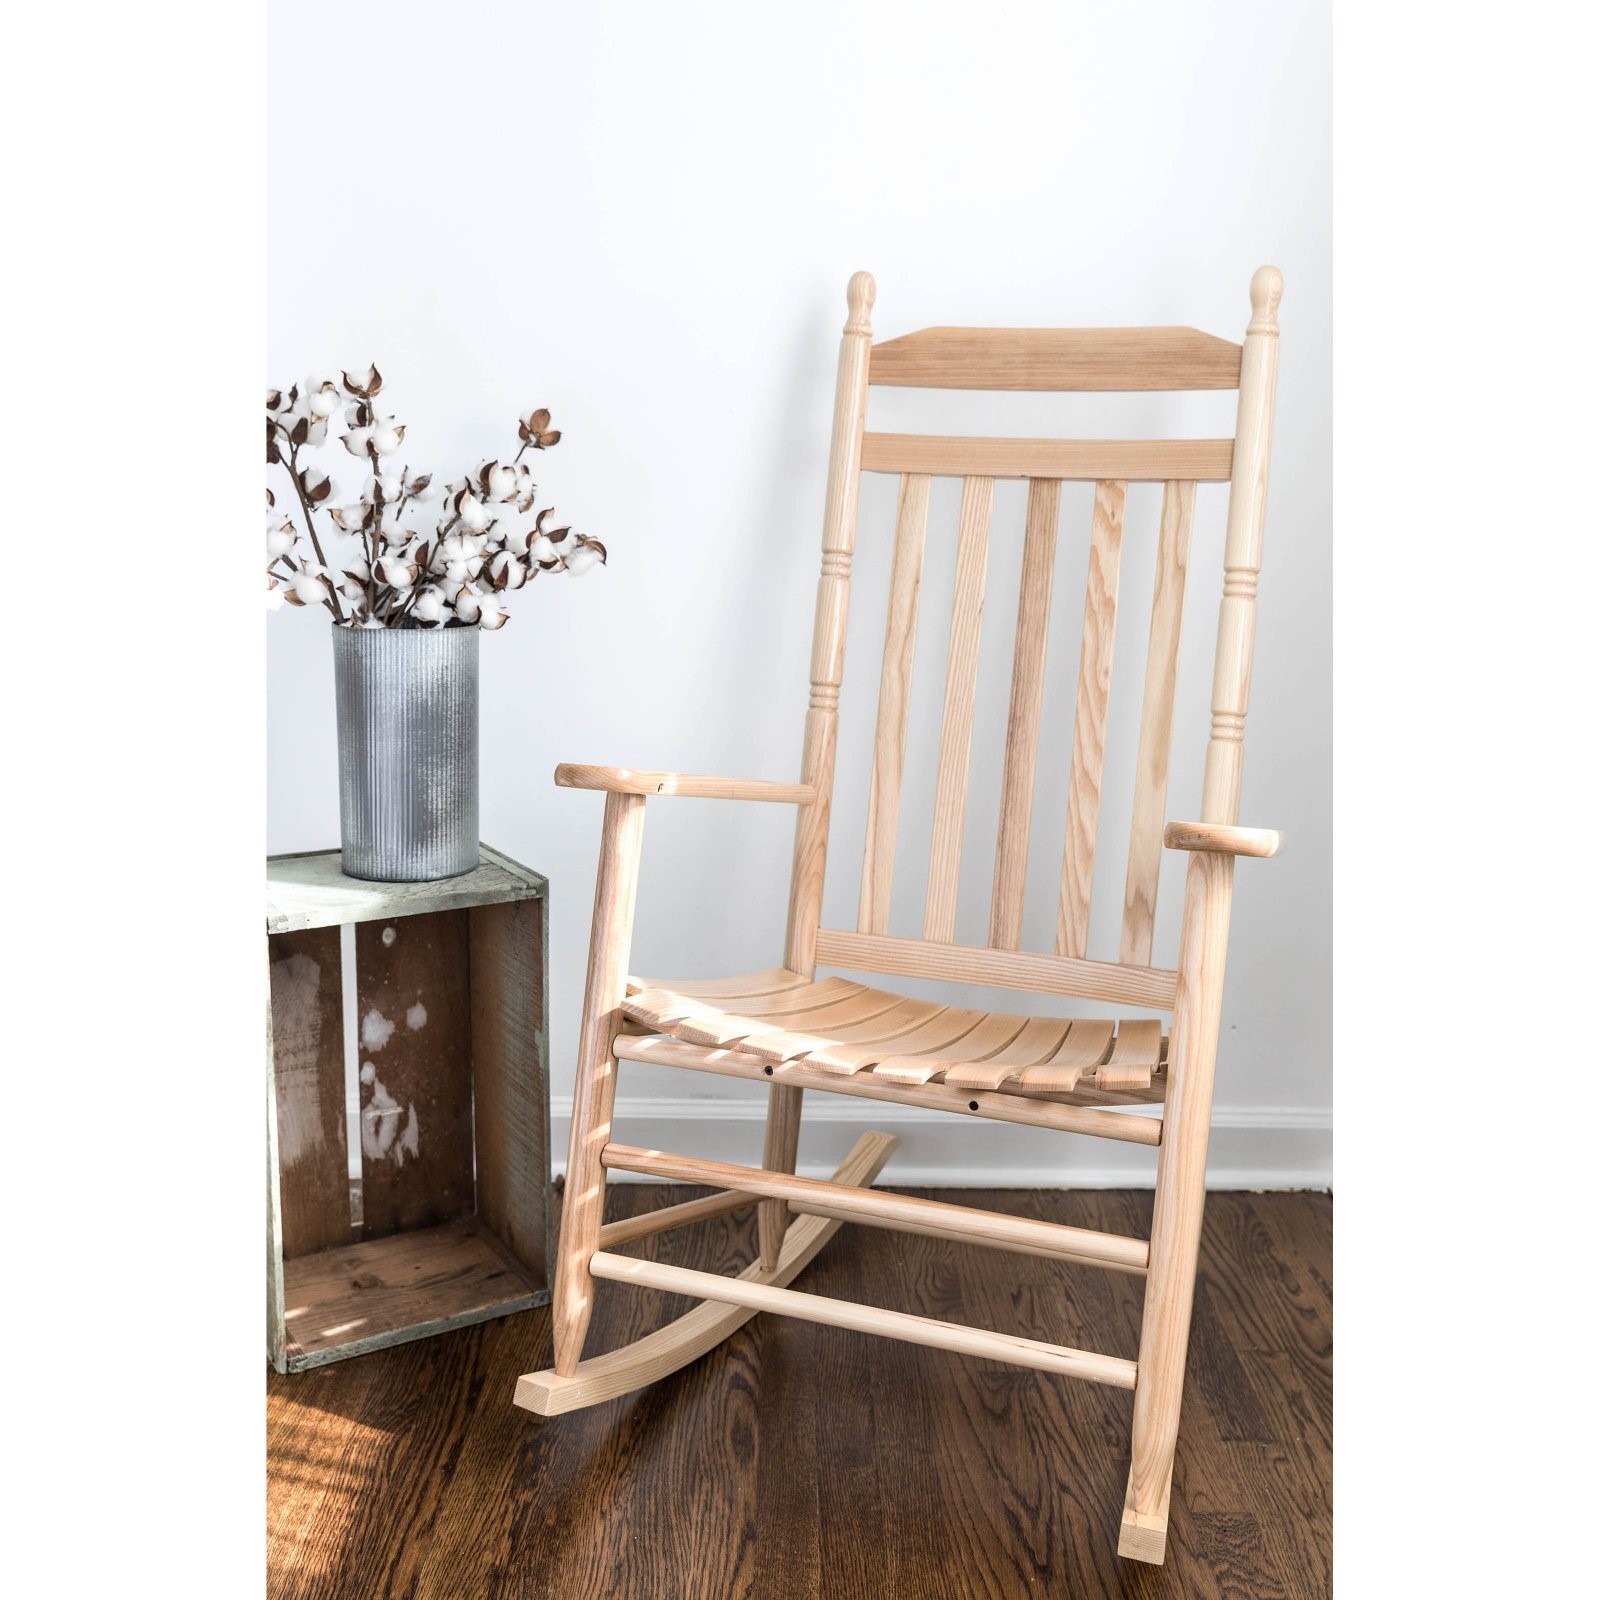 Dixie Seating Calabash 3 Piece Rocking Chair Set with Side Table - image 3 of 3